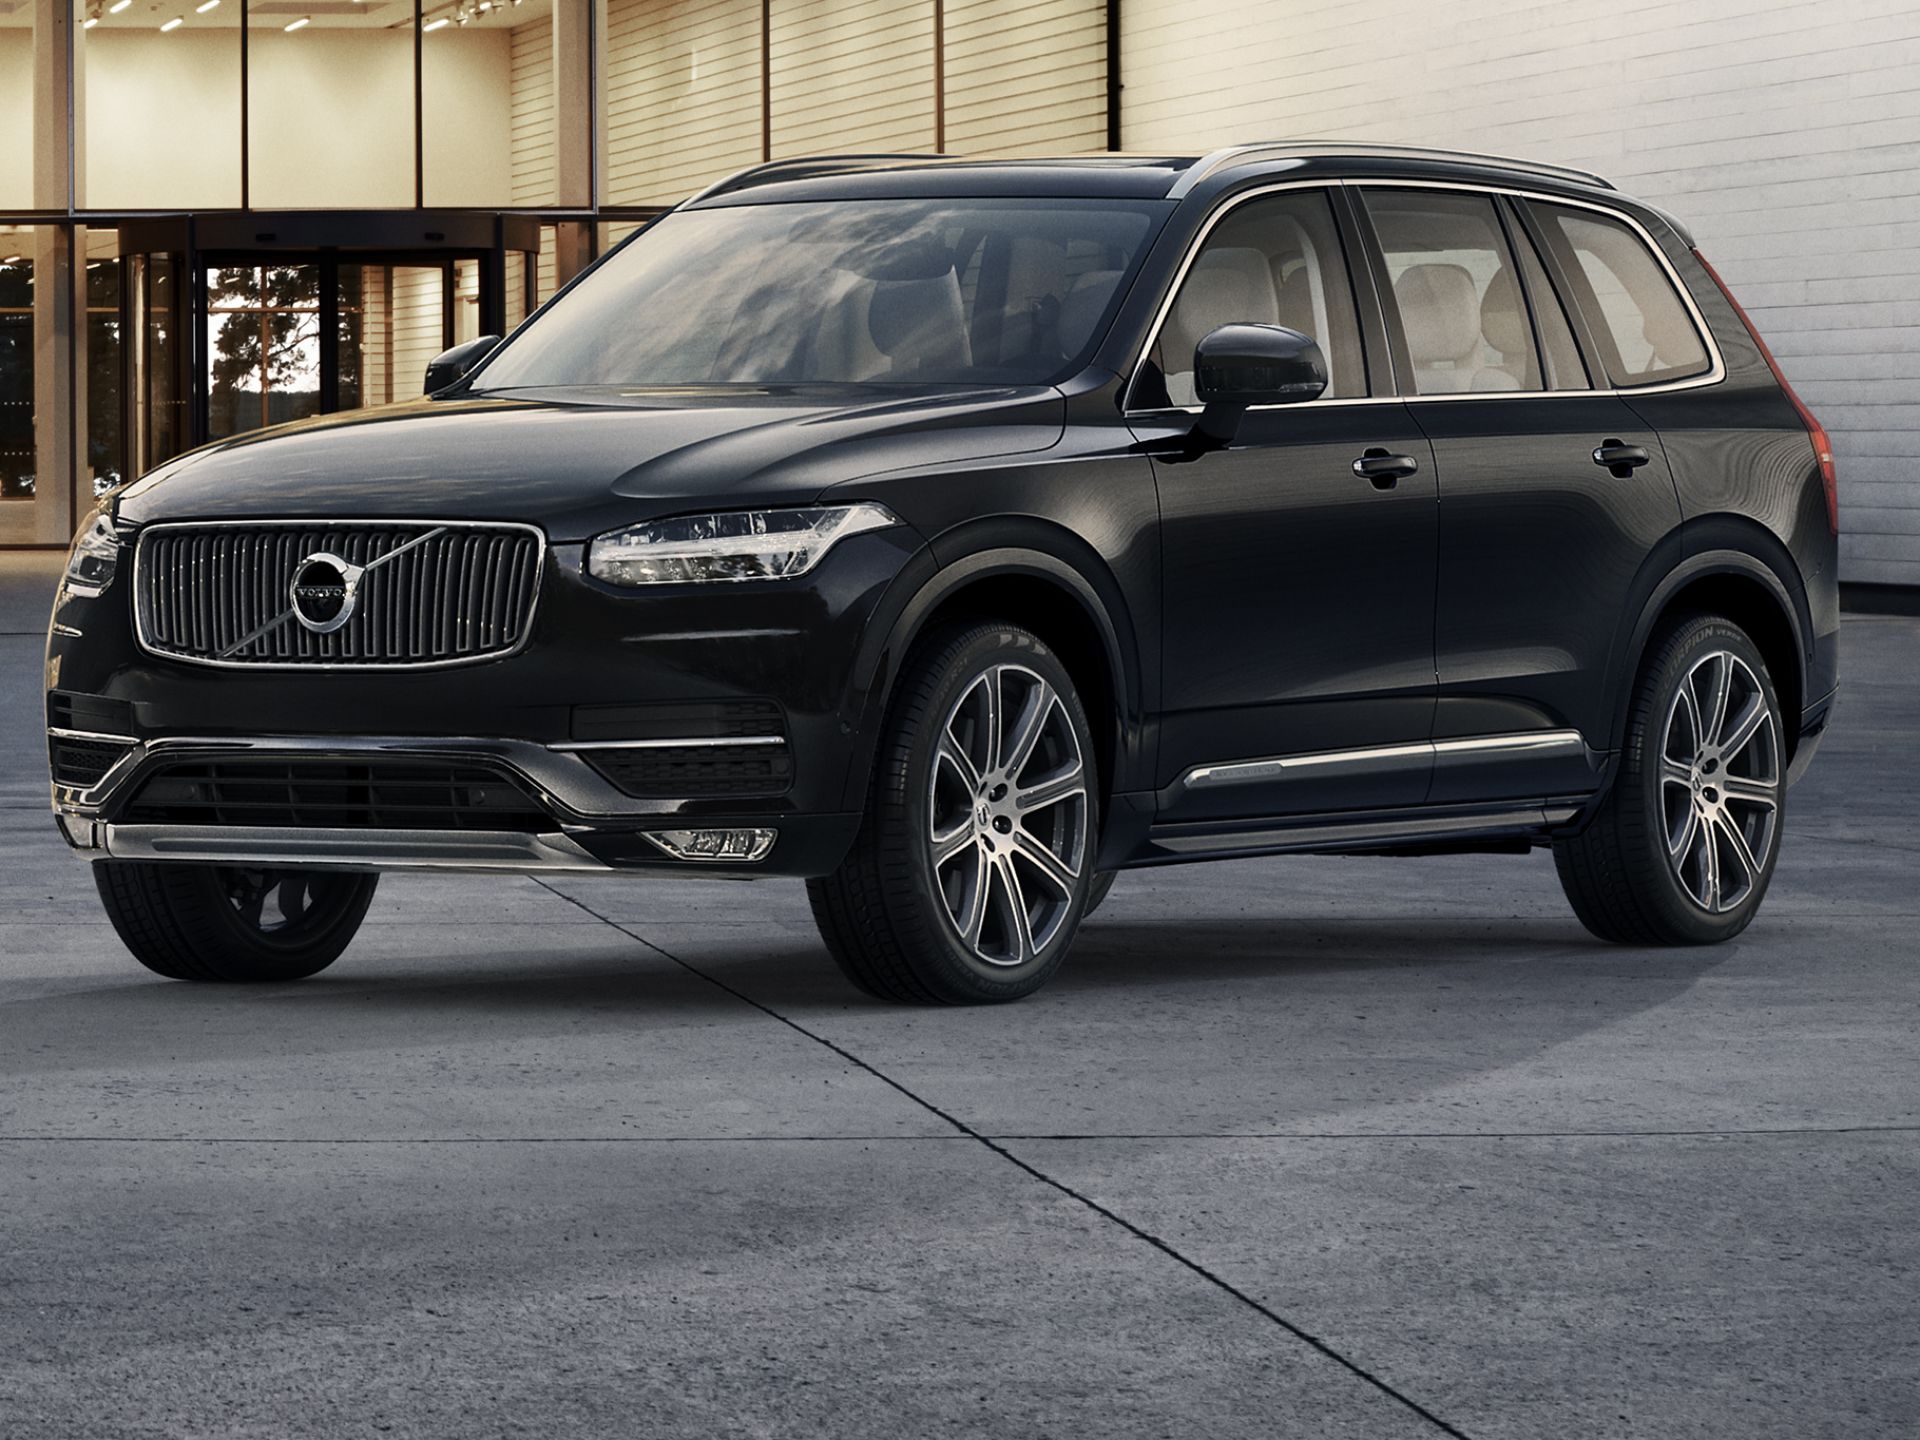 New Volvo XC90 crossover adds safety, styling